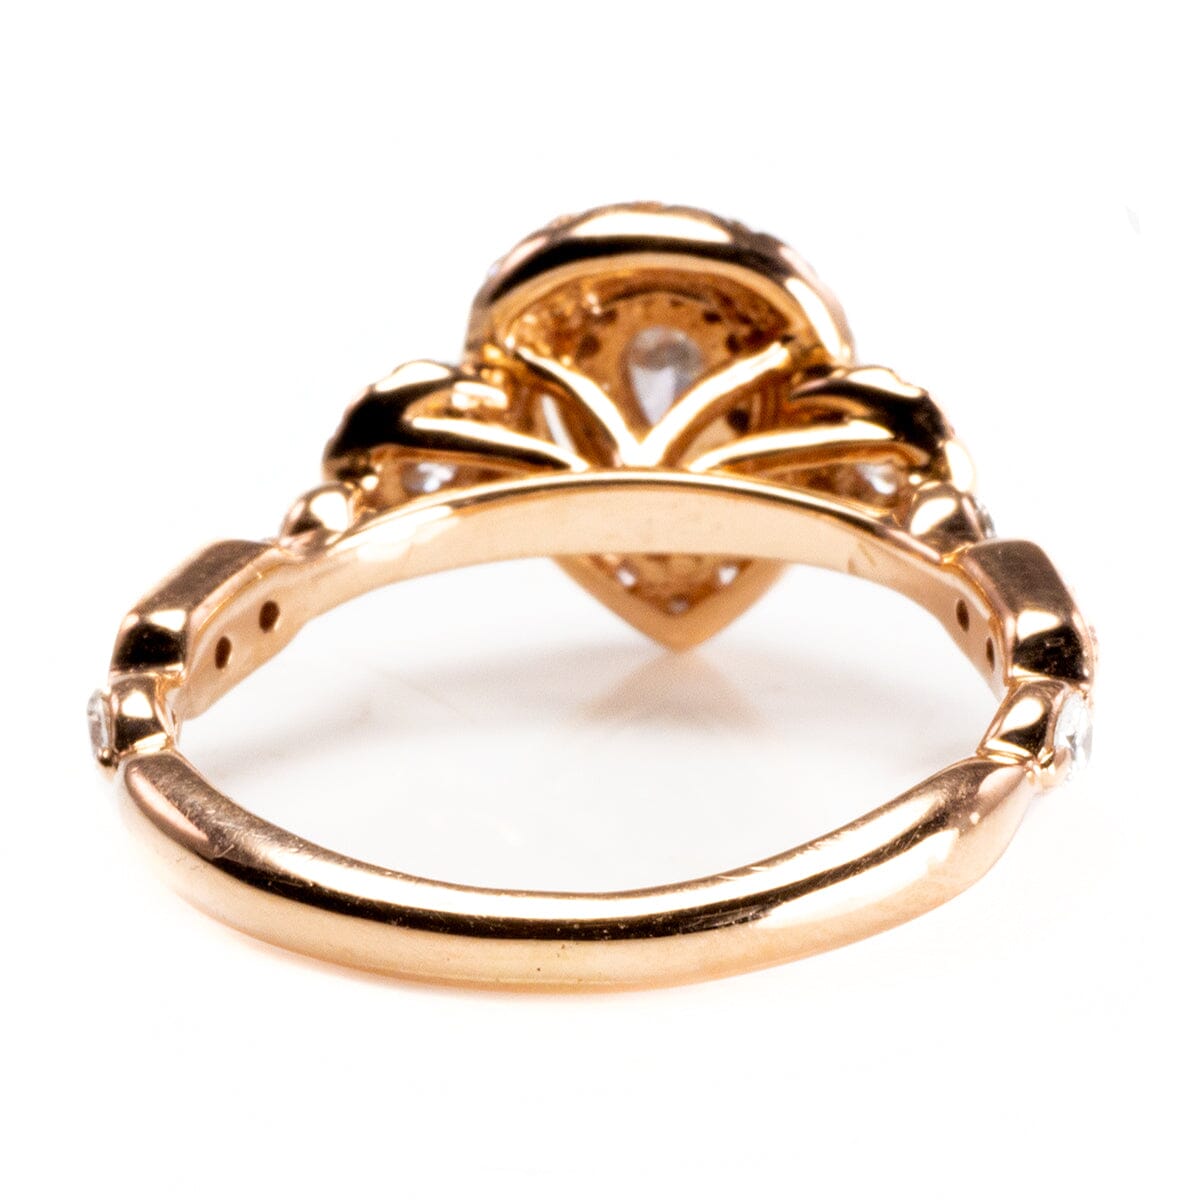 Great Lakes Boutique 14 k Rose Gold Diamond Ring